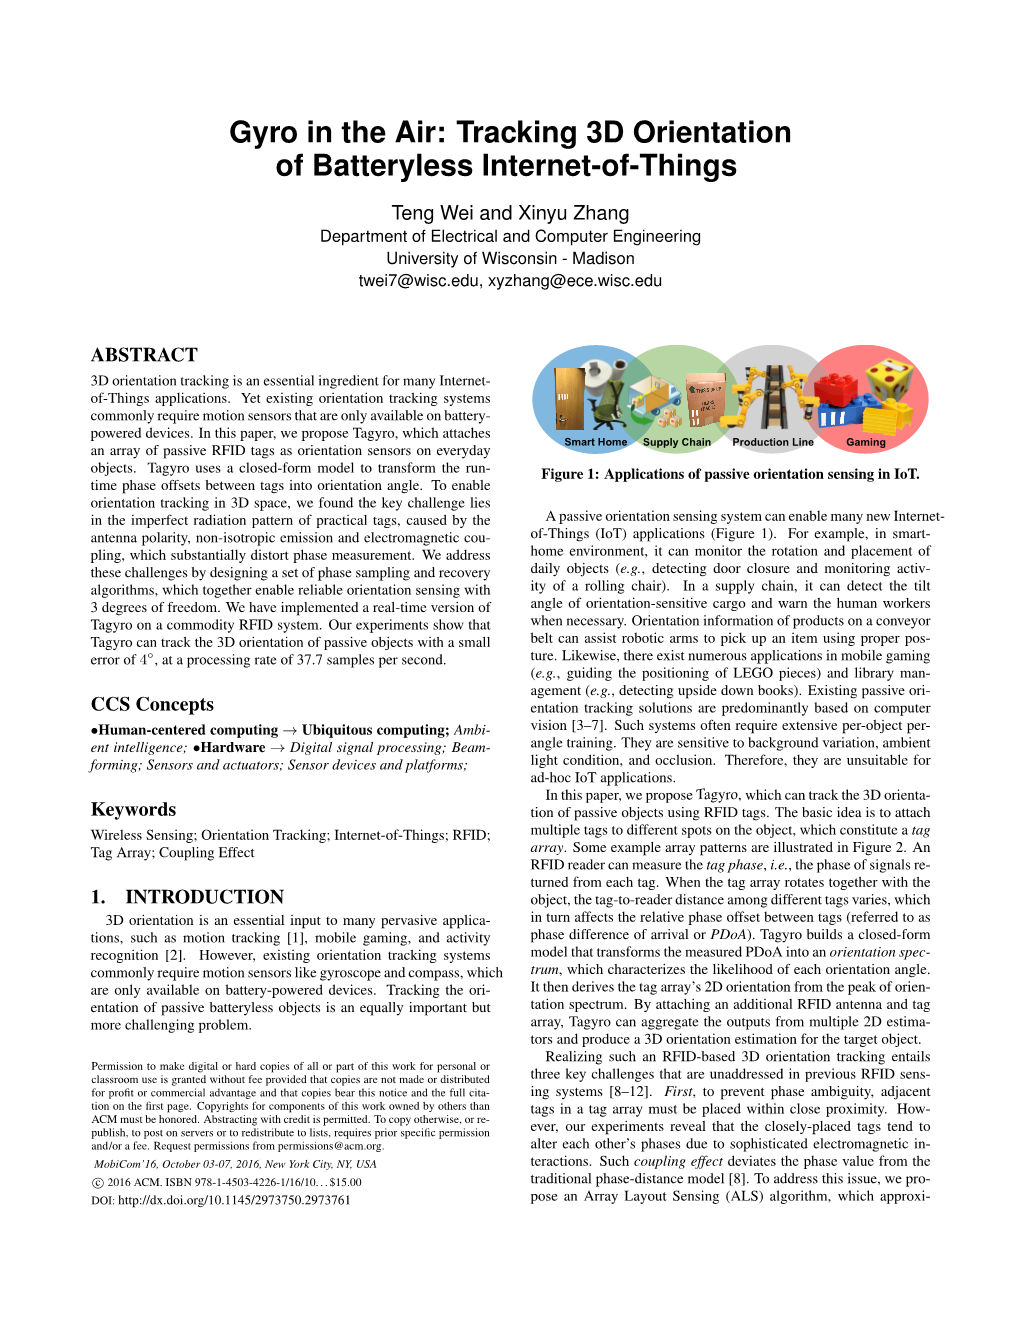 Gyro in the Air: Tracking 3D Orientation of Batteryless Internet-Of-Things